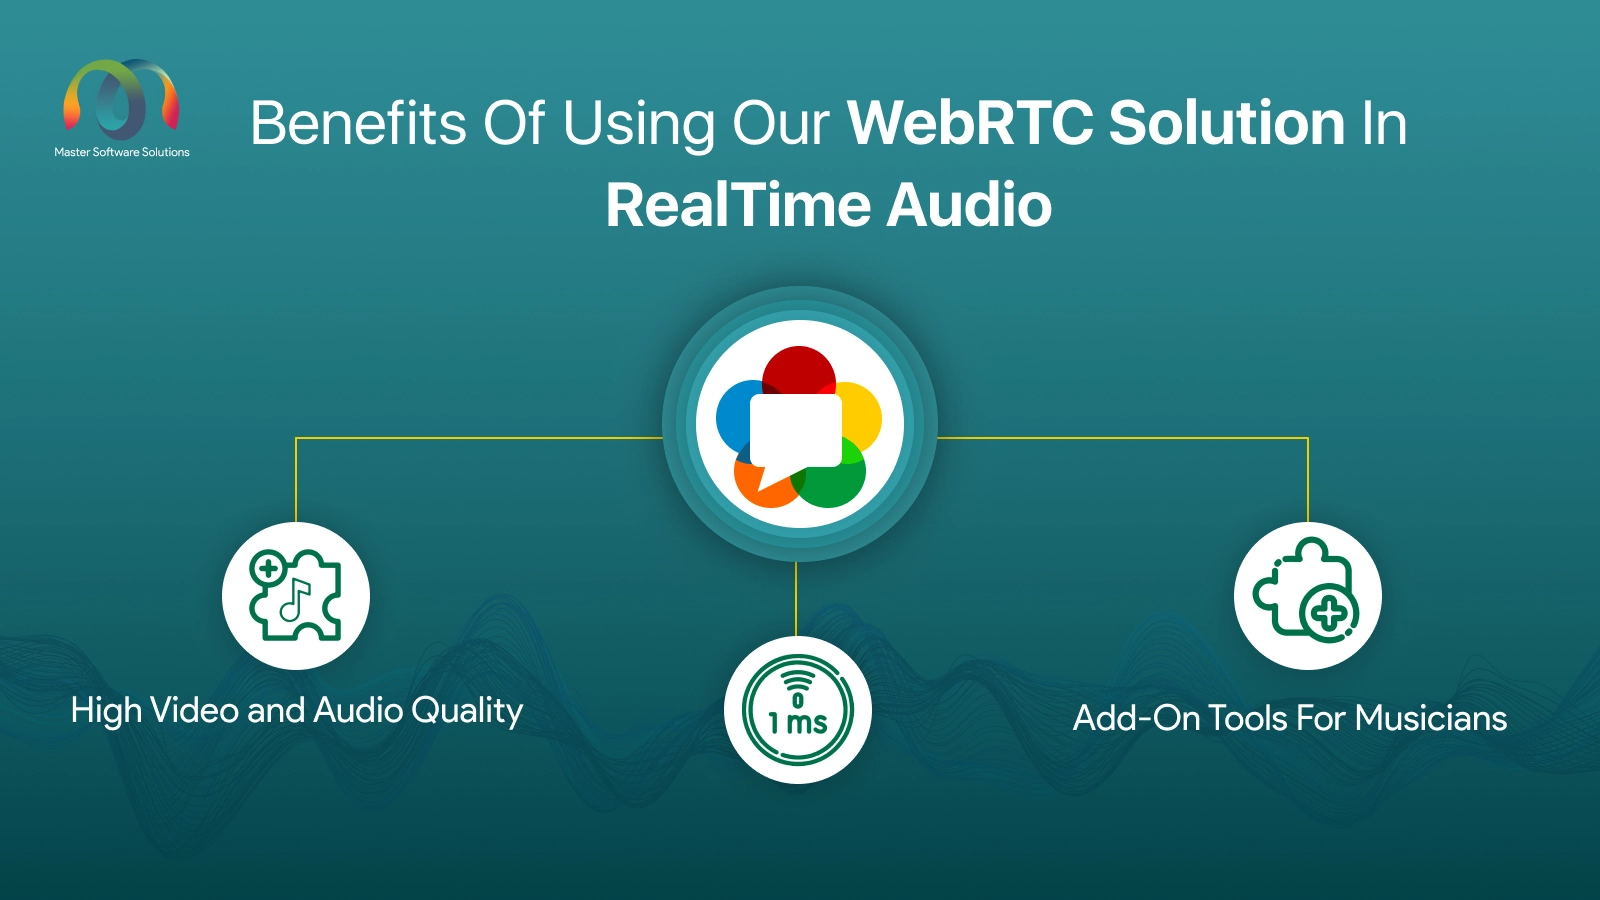 ravi garg, mss, benefits, webrtc, realtime audio, low-latency, high video and audio quality, add-on tools